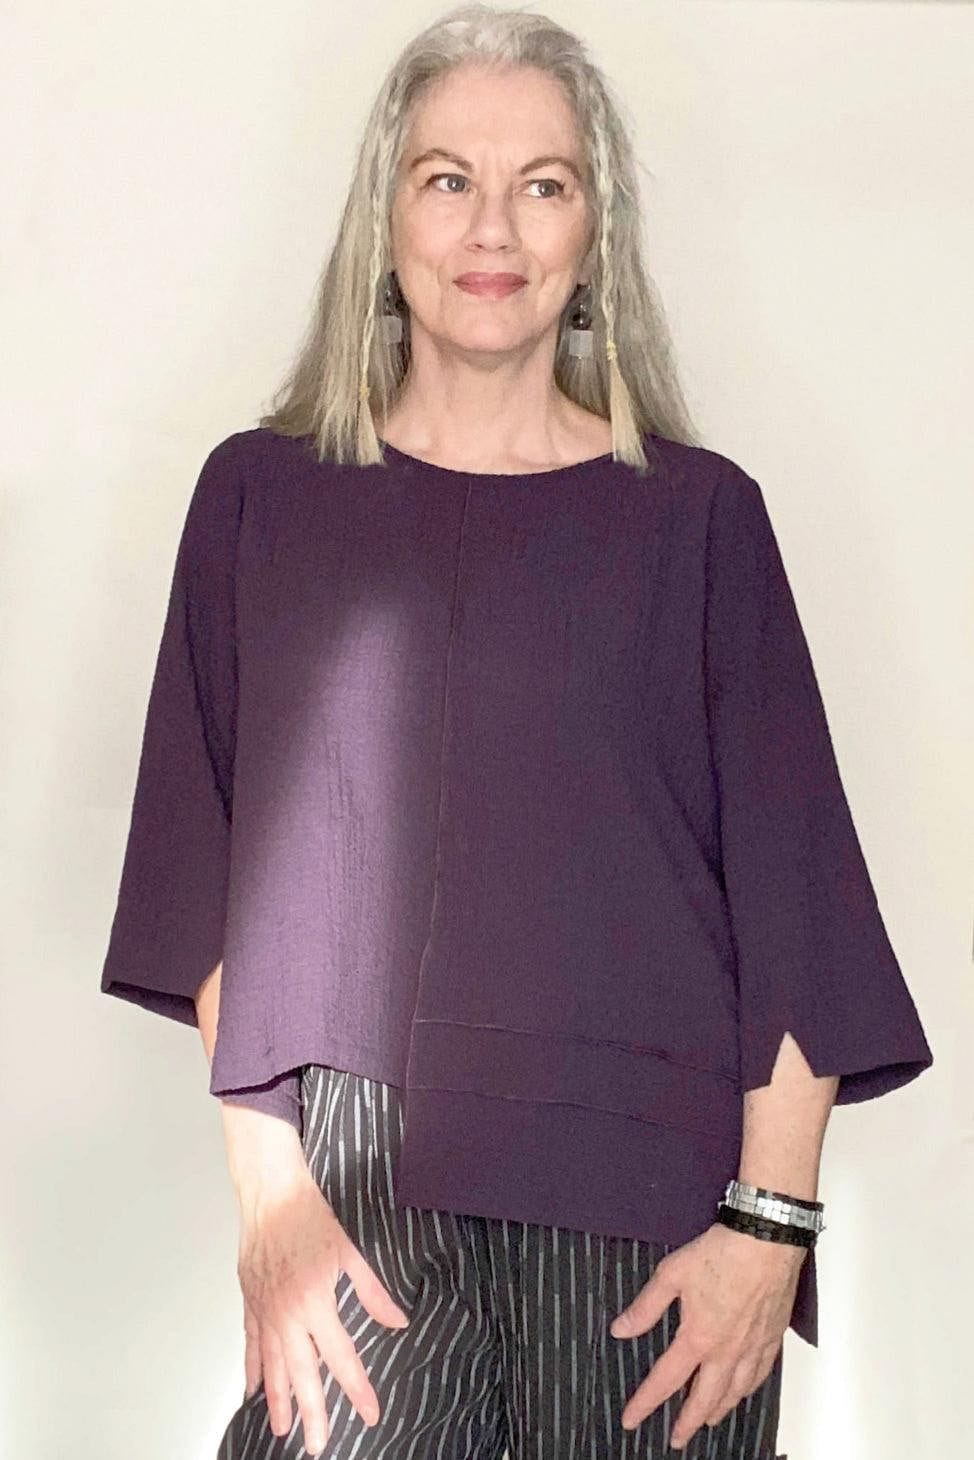 Woman with grey hair wearing a Plum colored top and black pants with a white line detail. She is looking off. She is also wearing black and clear earrings and a black and silver colored wooden wrap bracelette